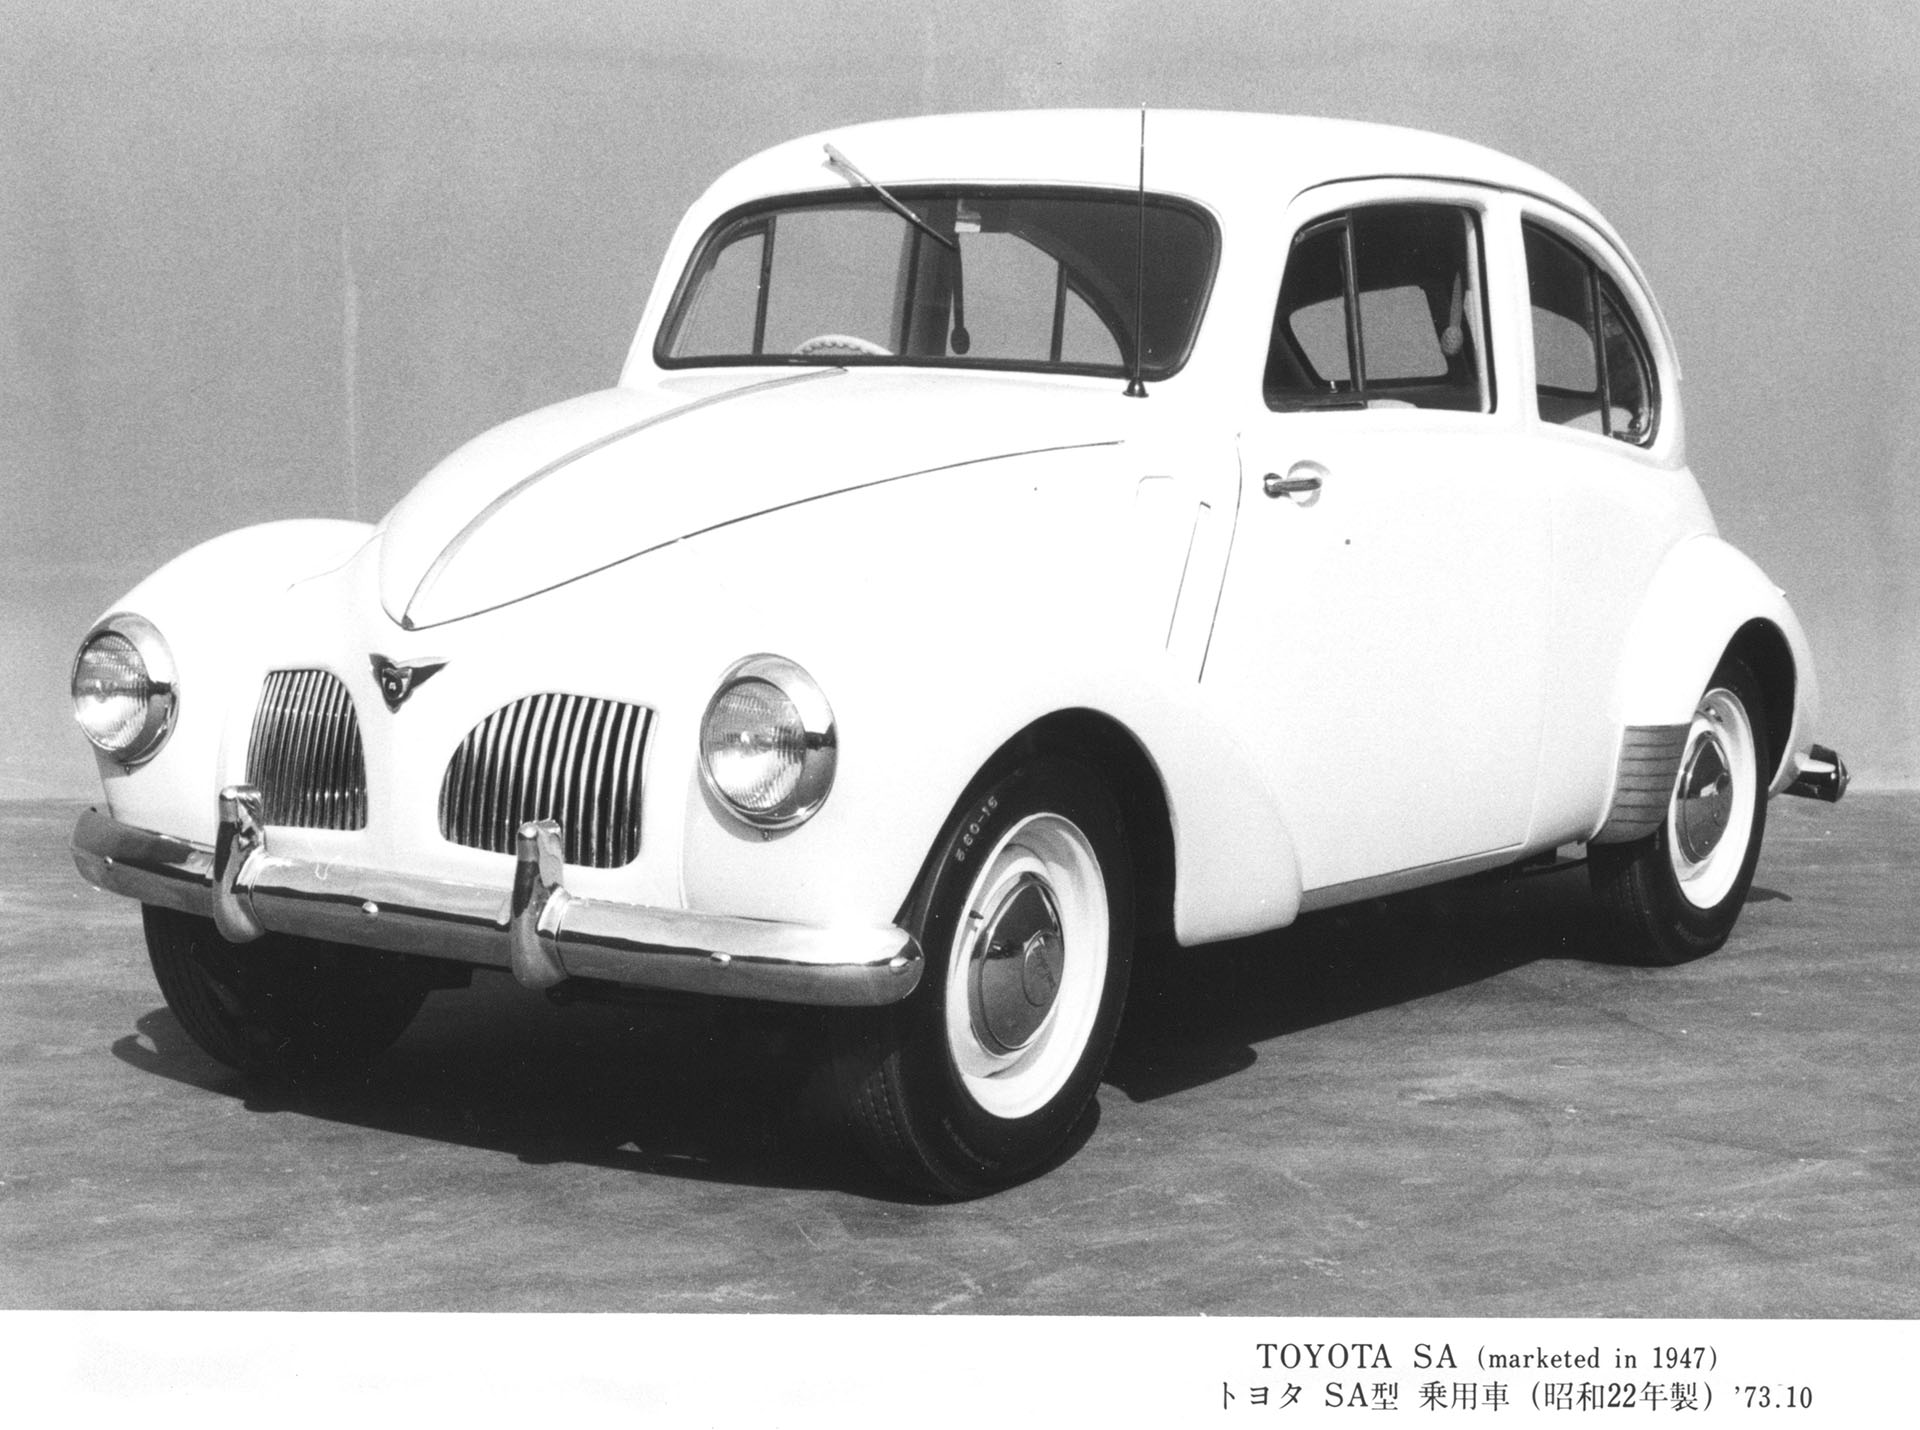 TOYOTA SA (marketed in 1947)